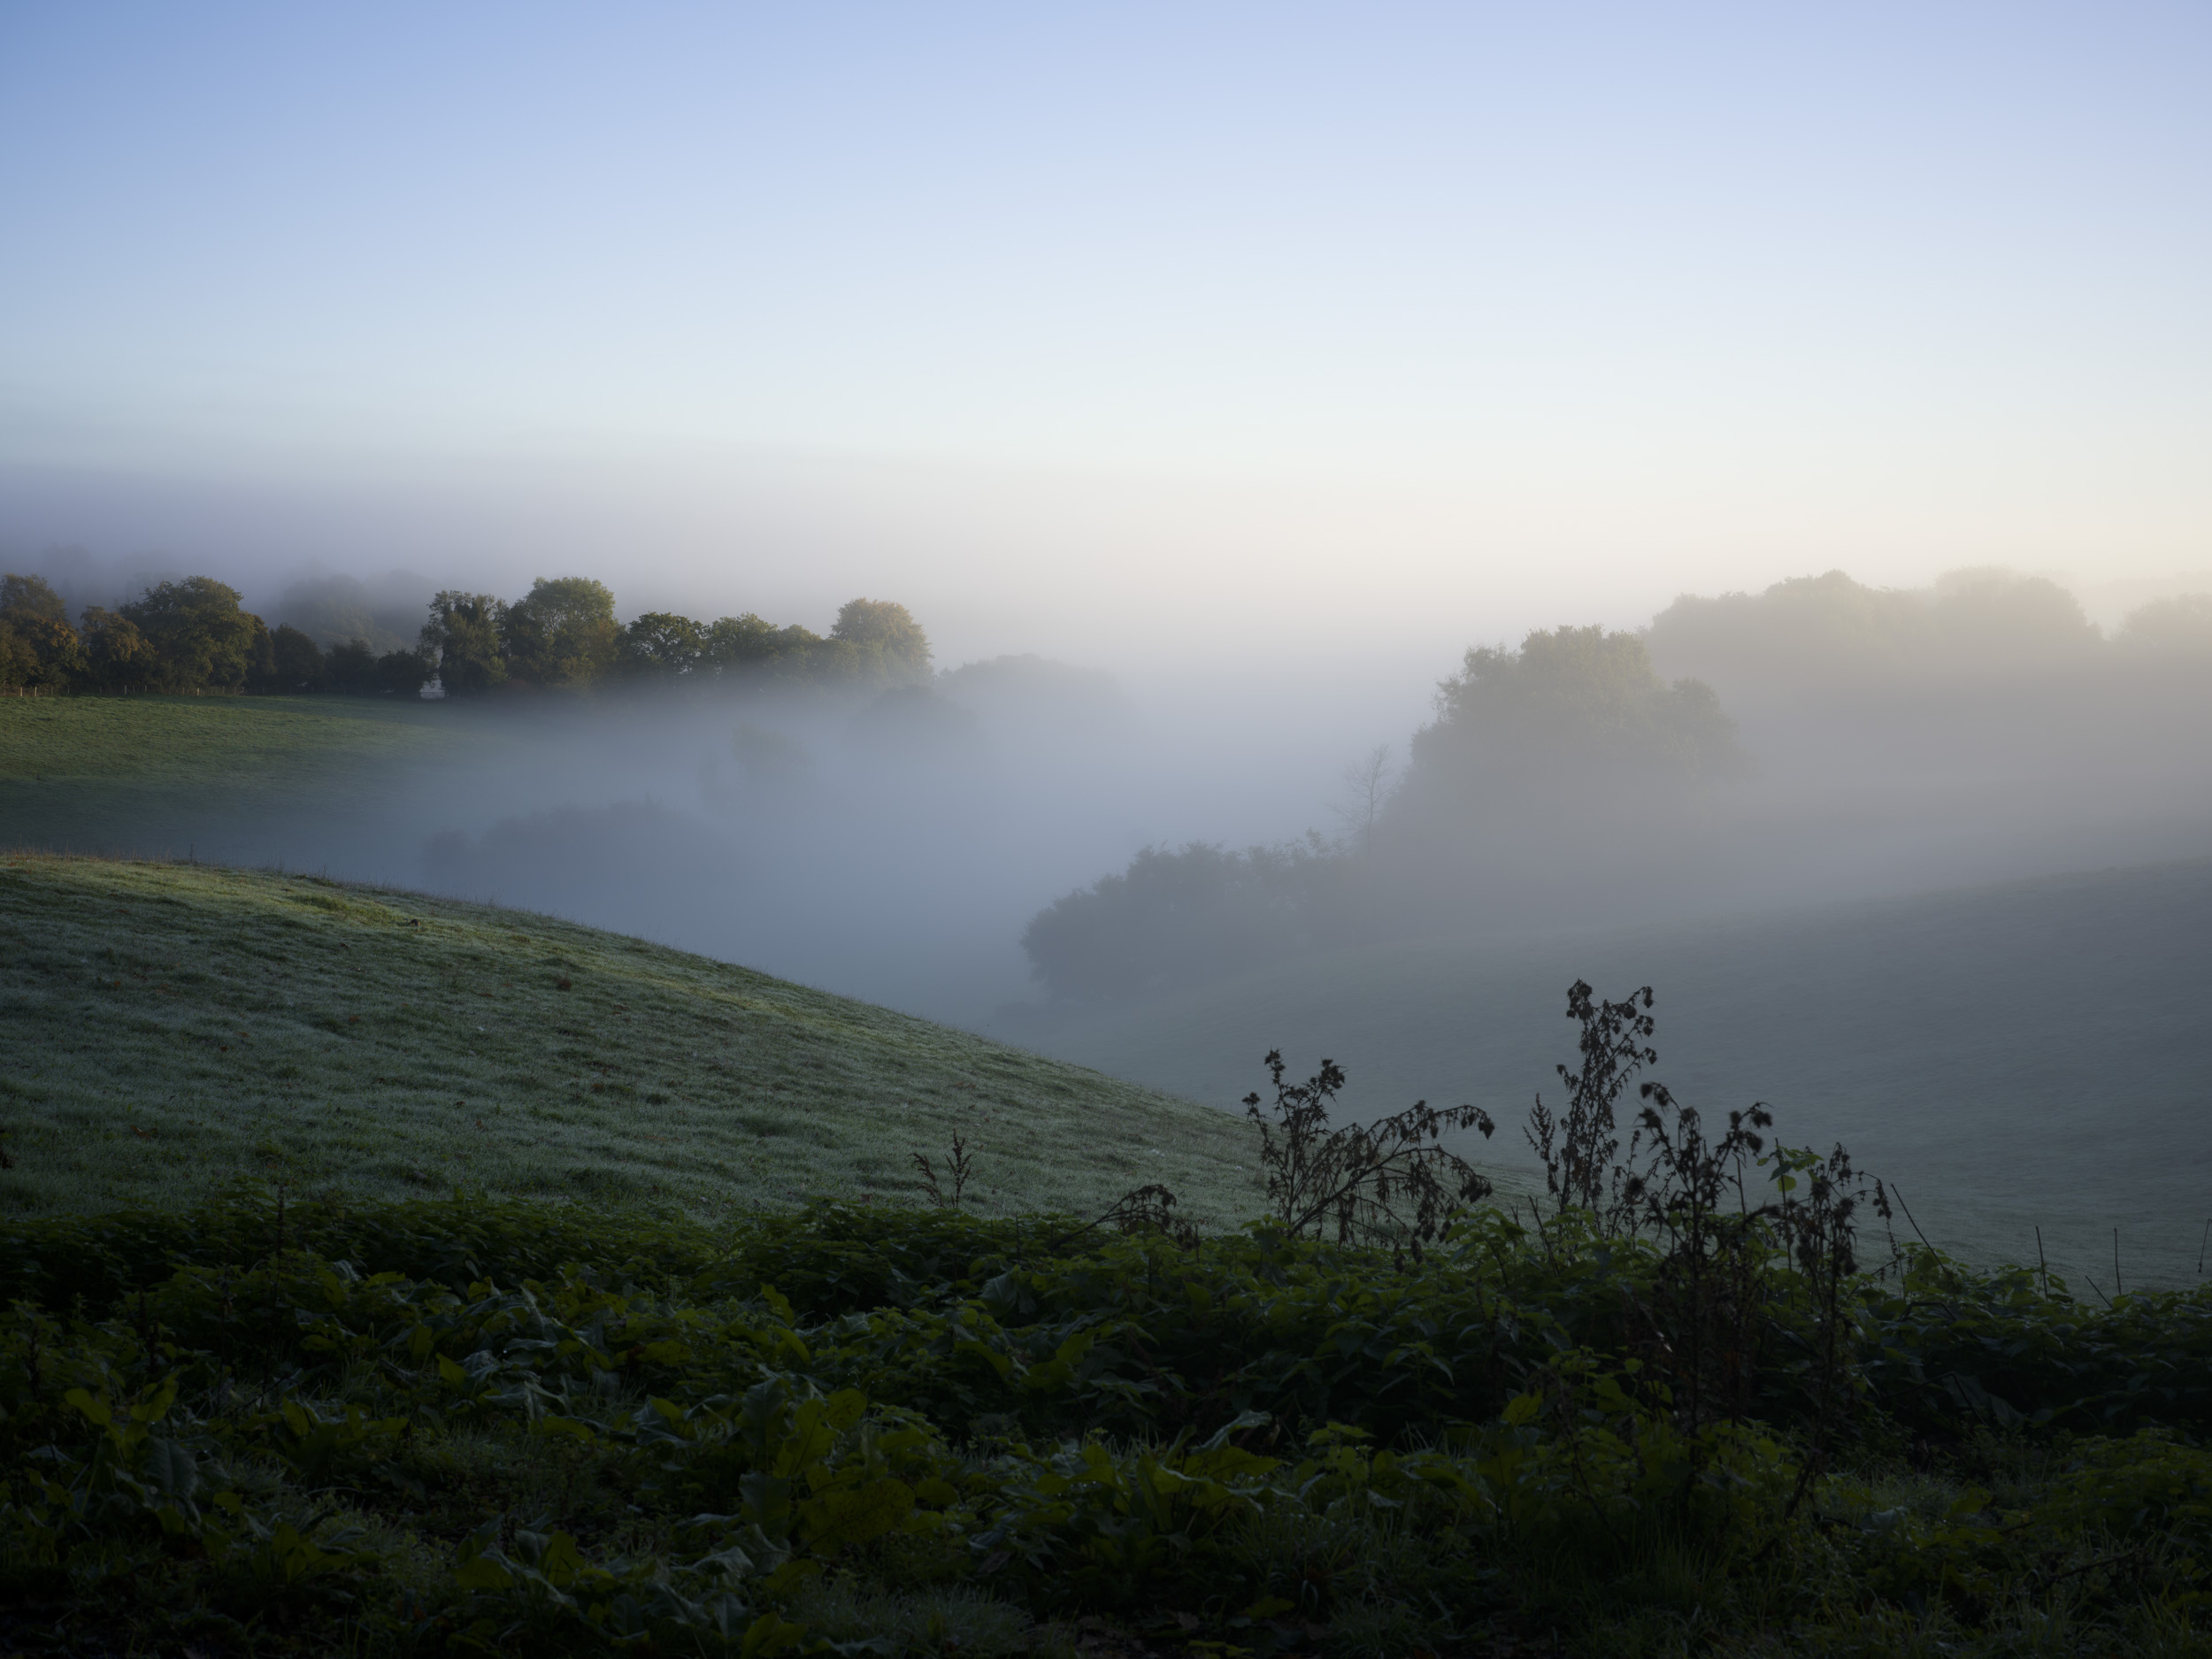 Sample image taken with the Hasselblad X2D 100C of a landscape shrouded in mist